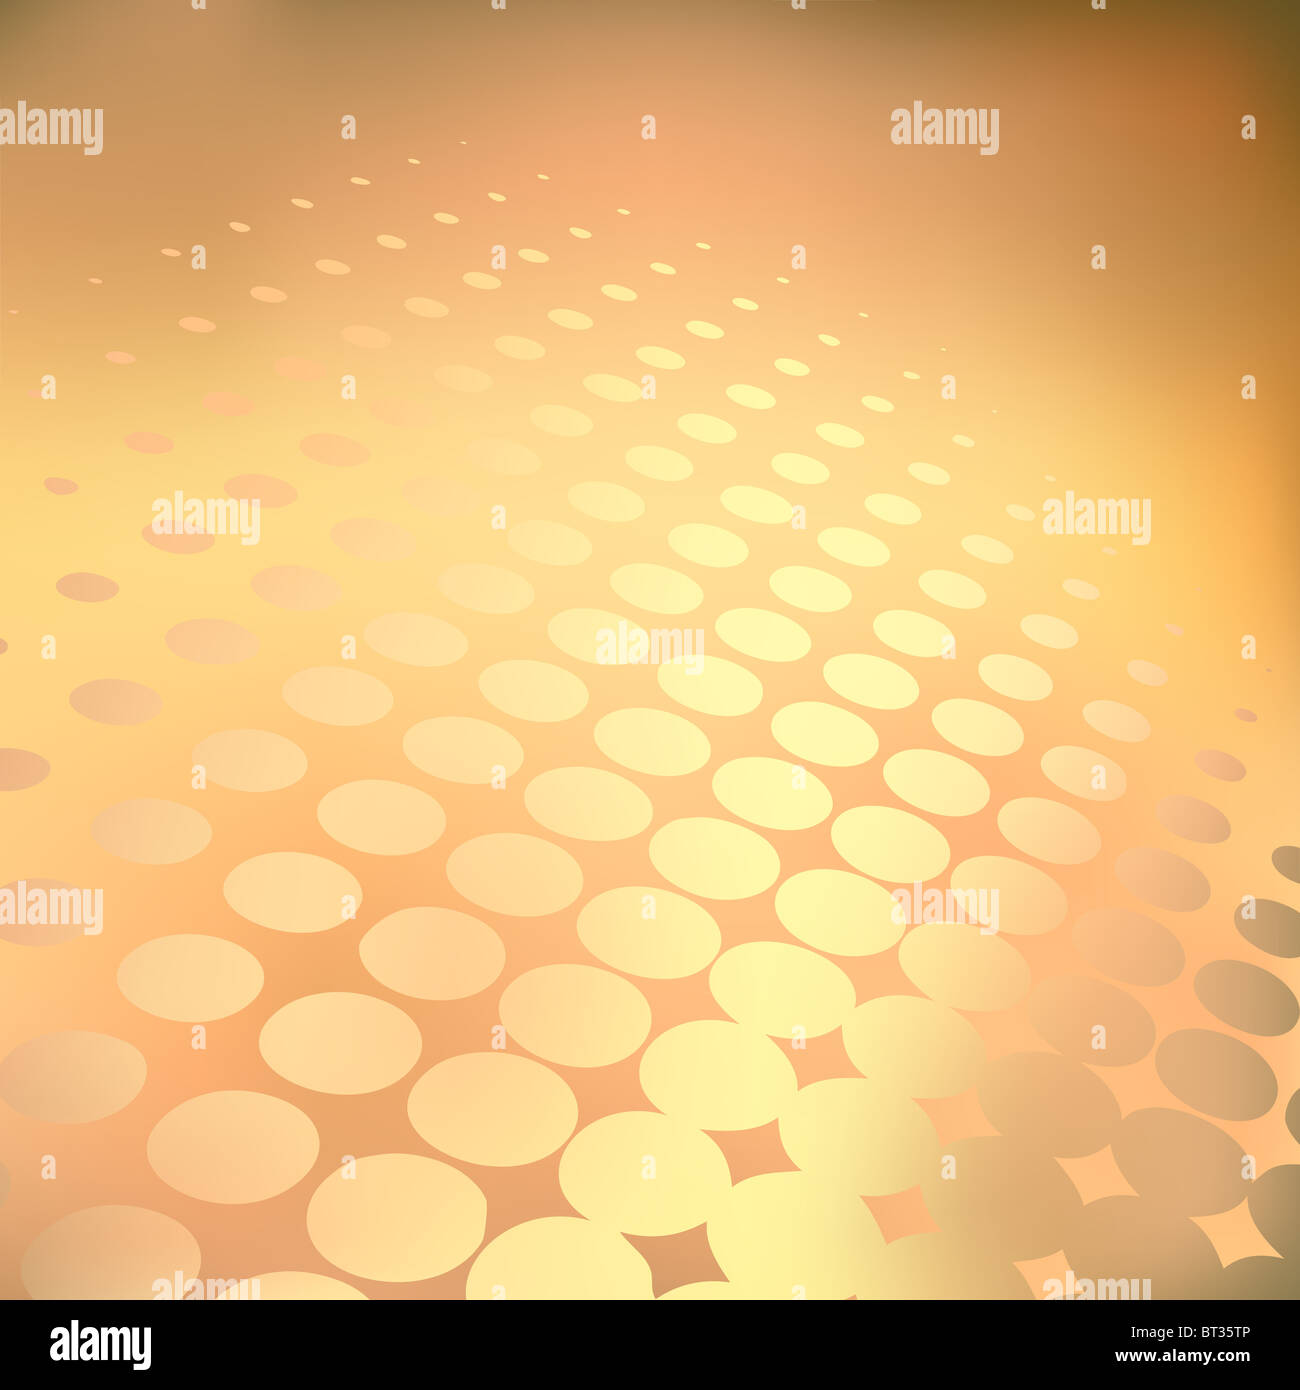 Abstract illustrated background of light dots Stock Photo